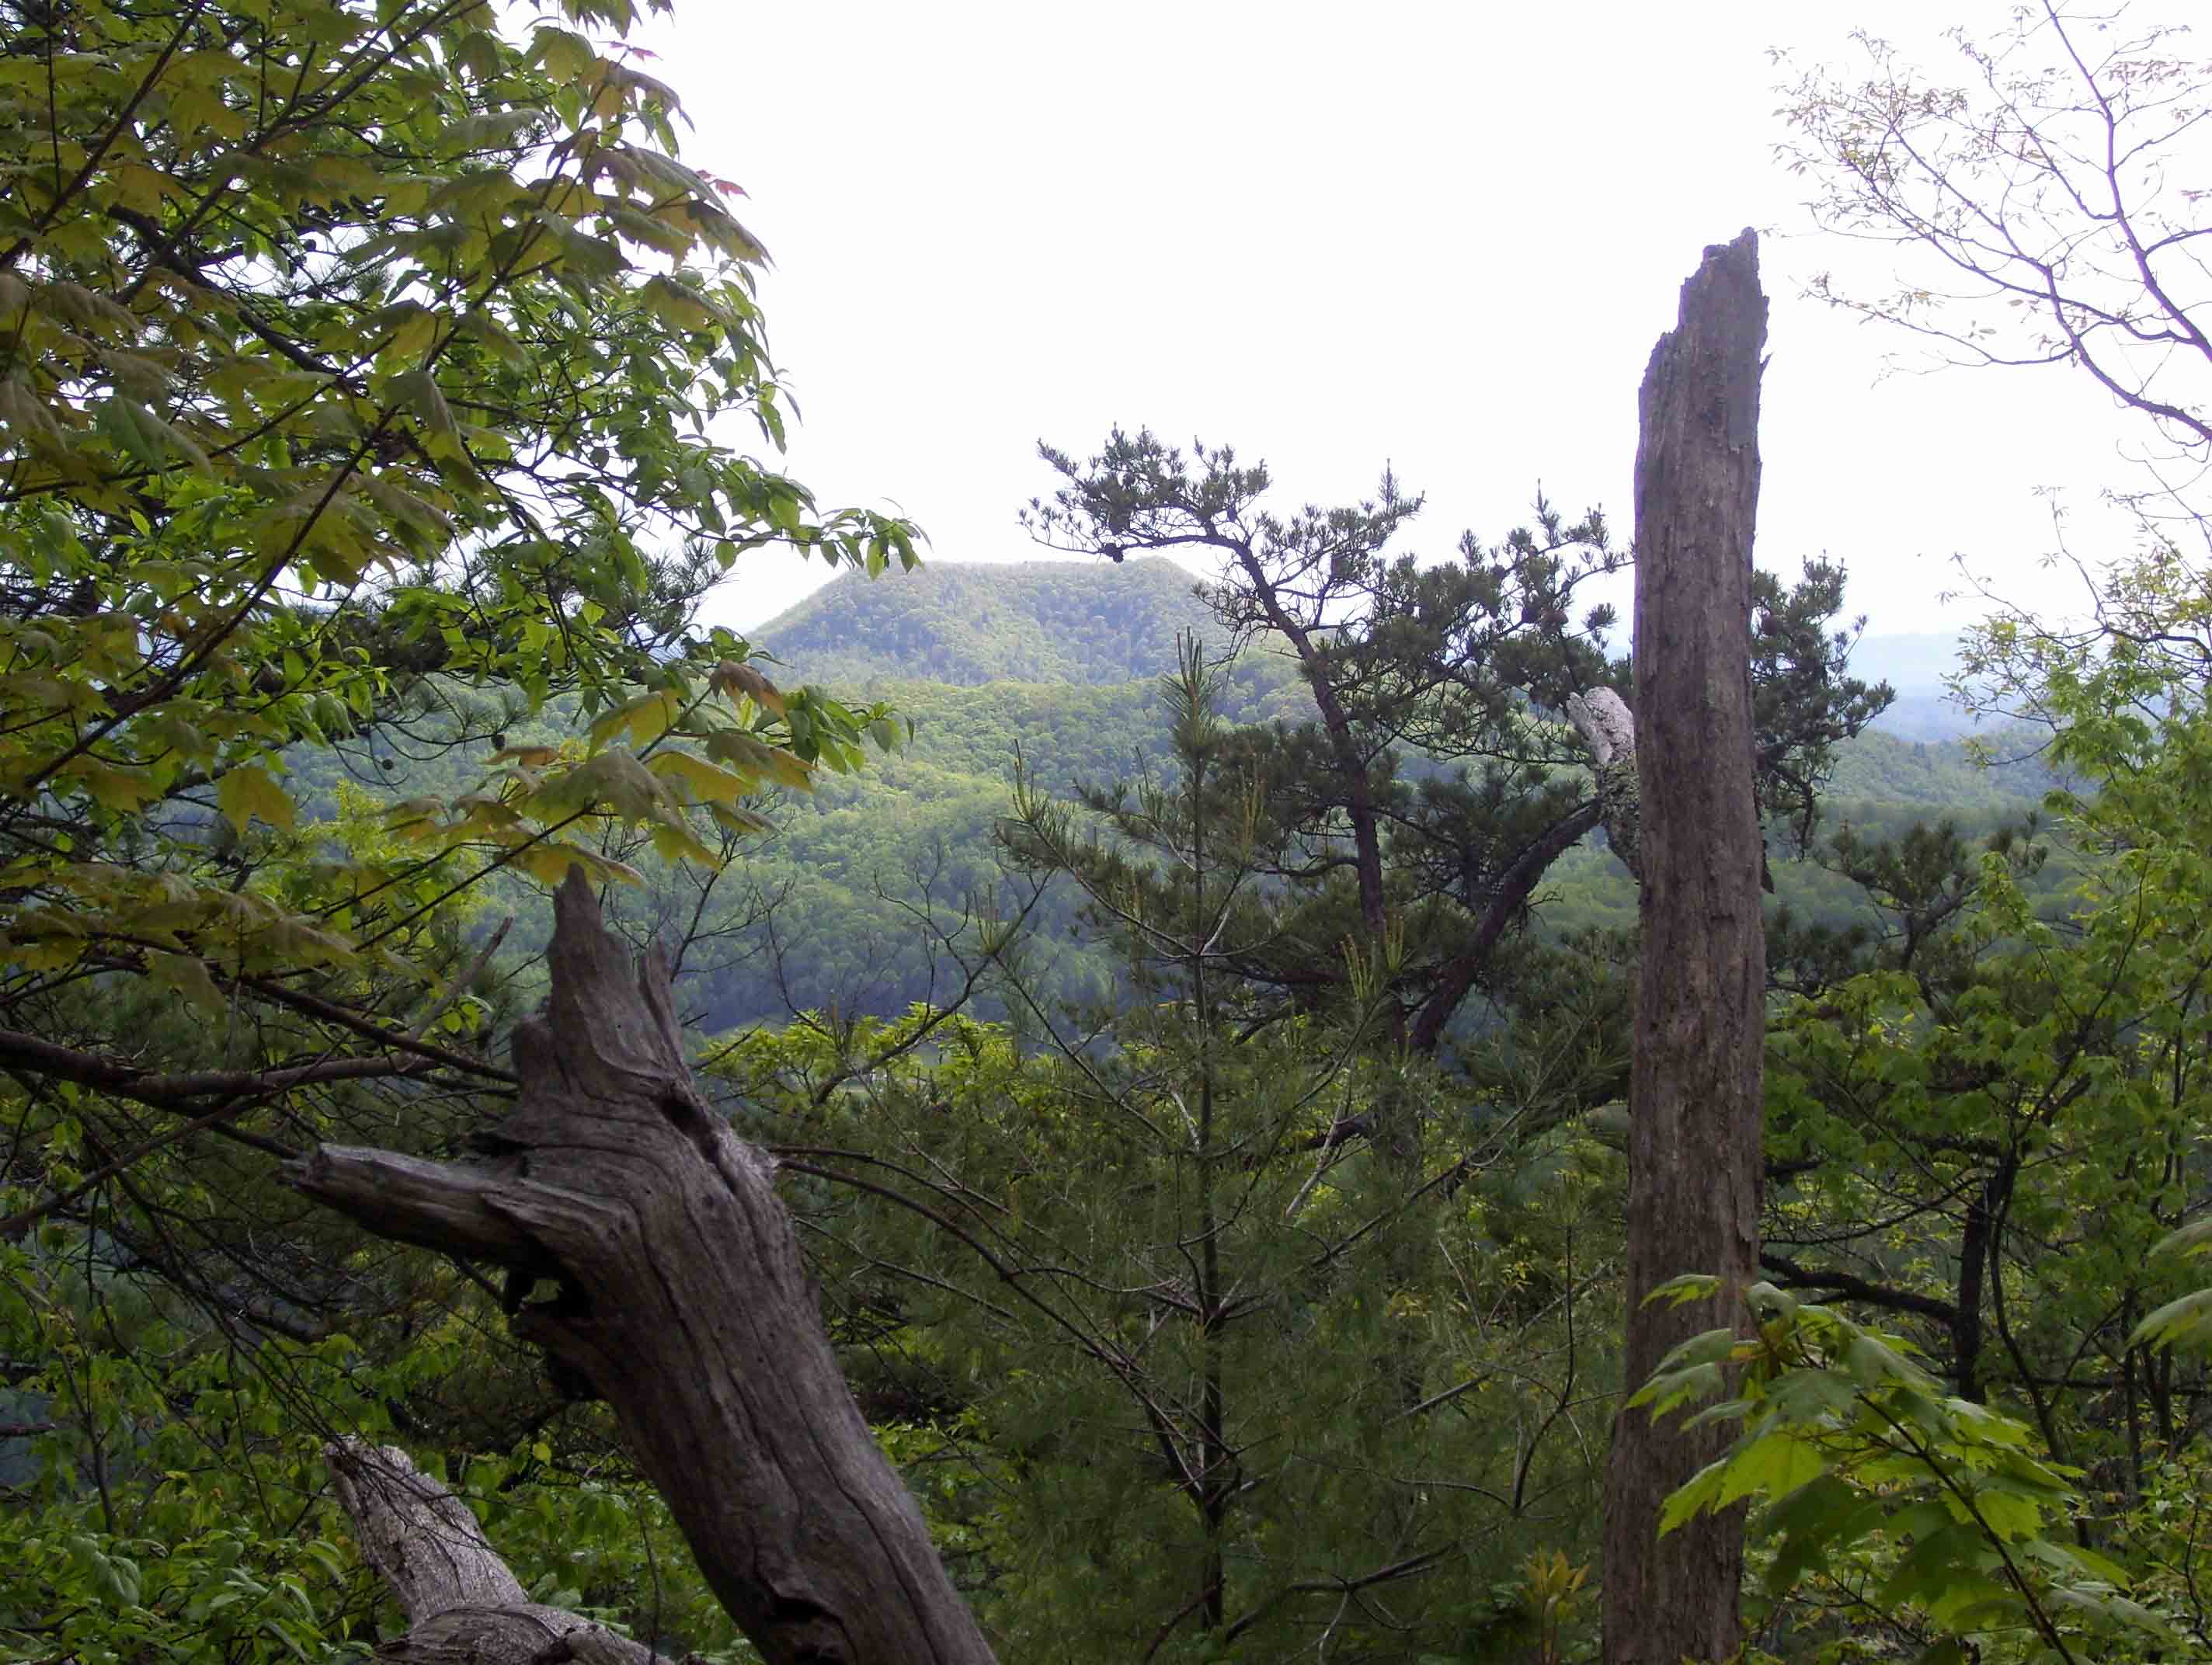 View to west from a blowdown patch. This was taken at approx. MM 7.9  near the western (trail south) junction with the Saunders Shelter loop trail. From here the southbound trail begins a long descent to Whitetop Laurel Creek.  Courtesy dlcul@conncoll.edu